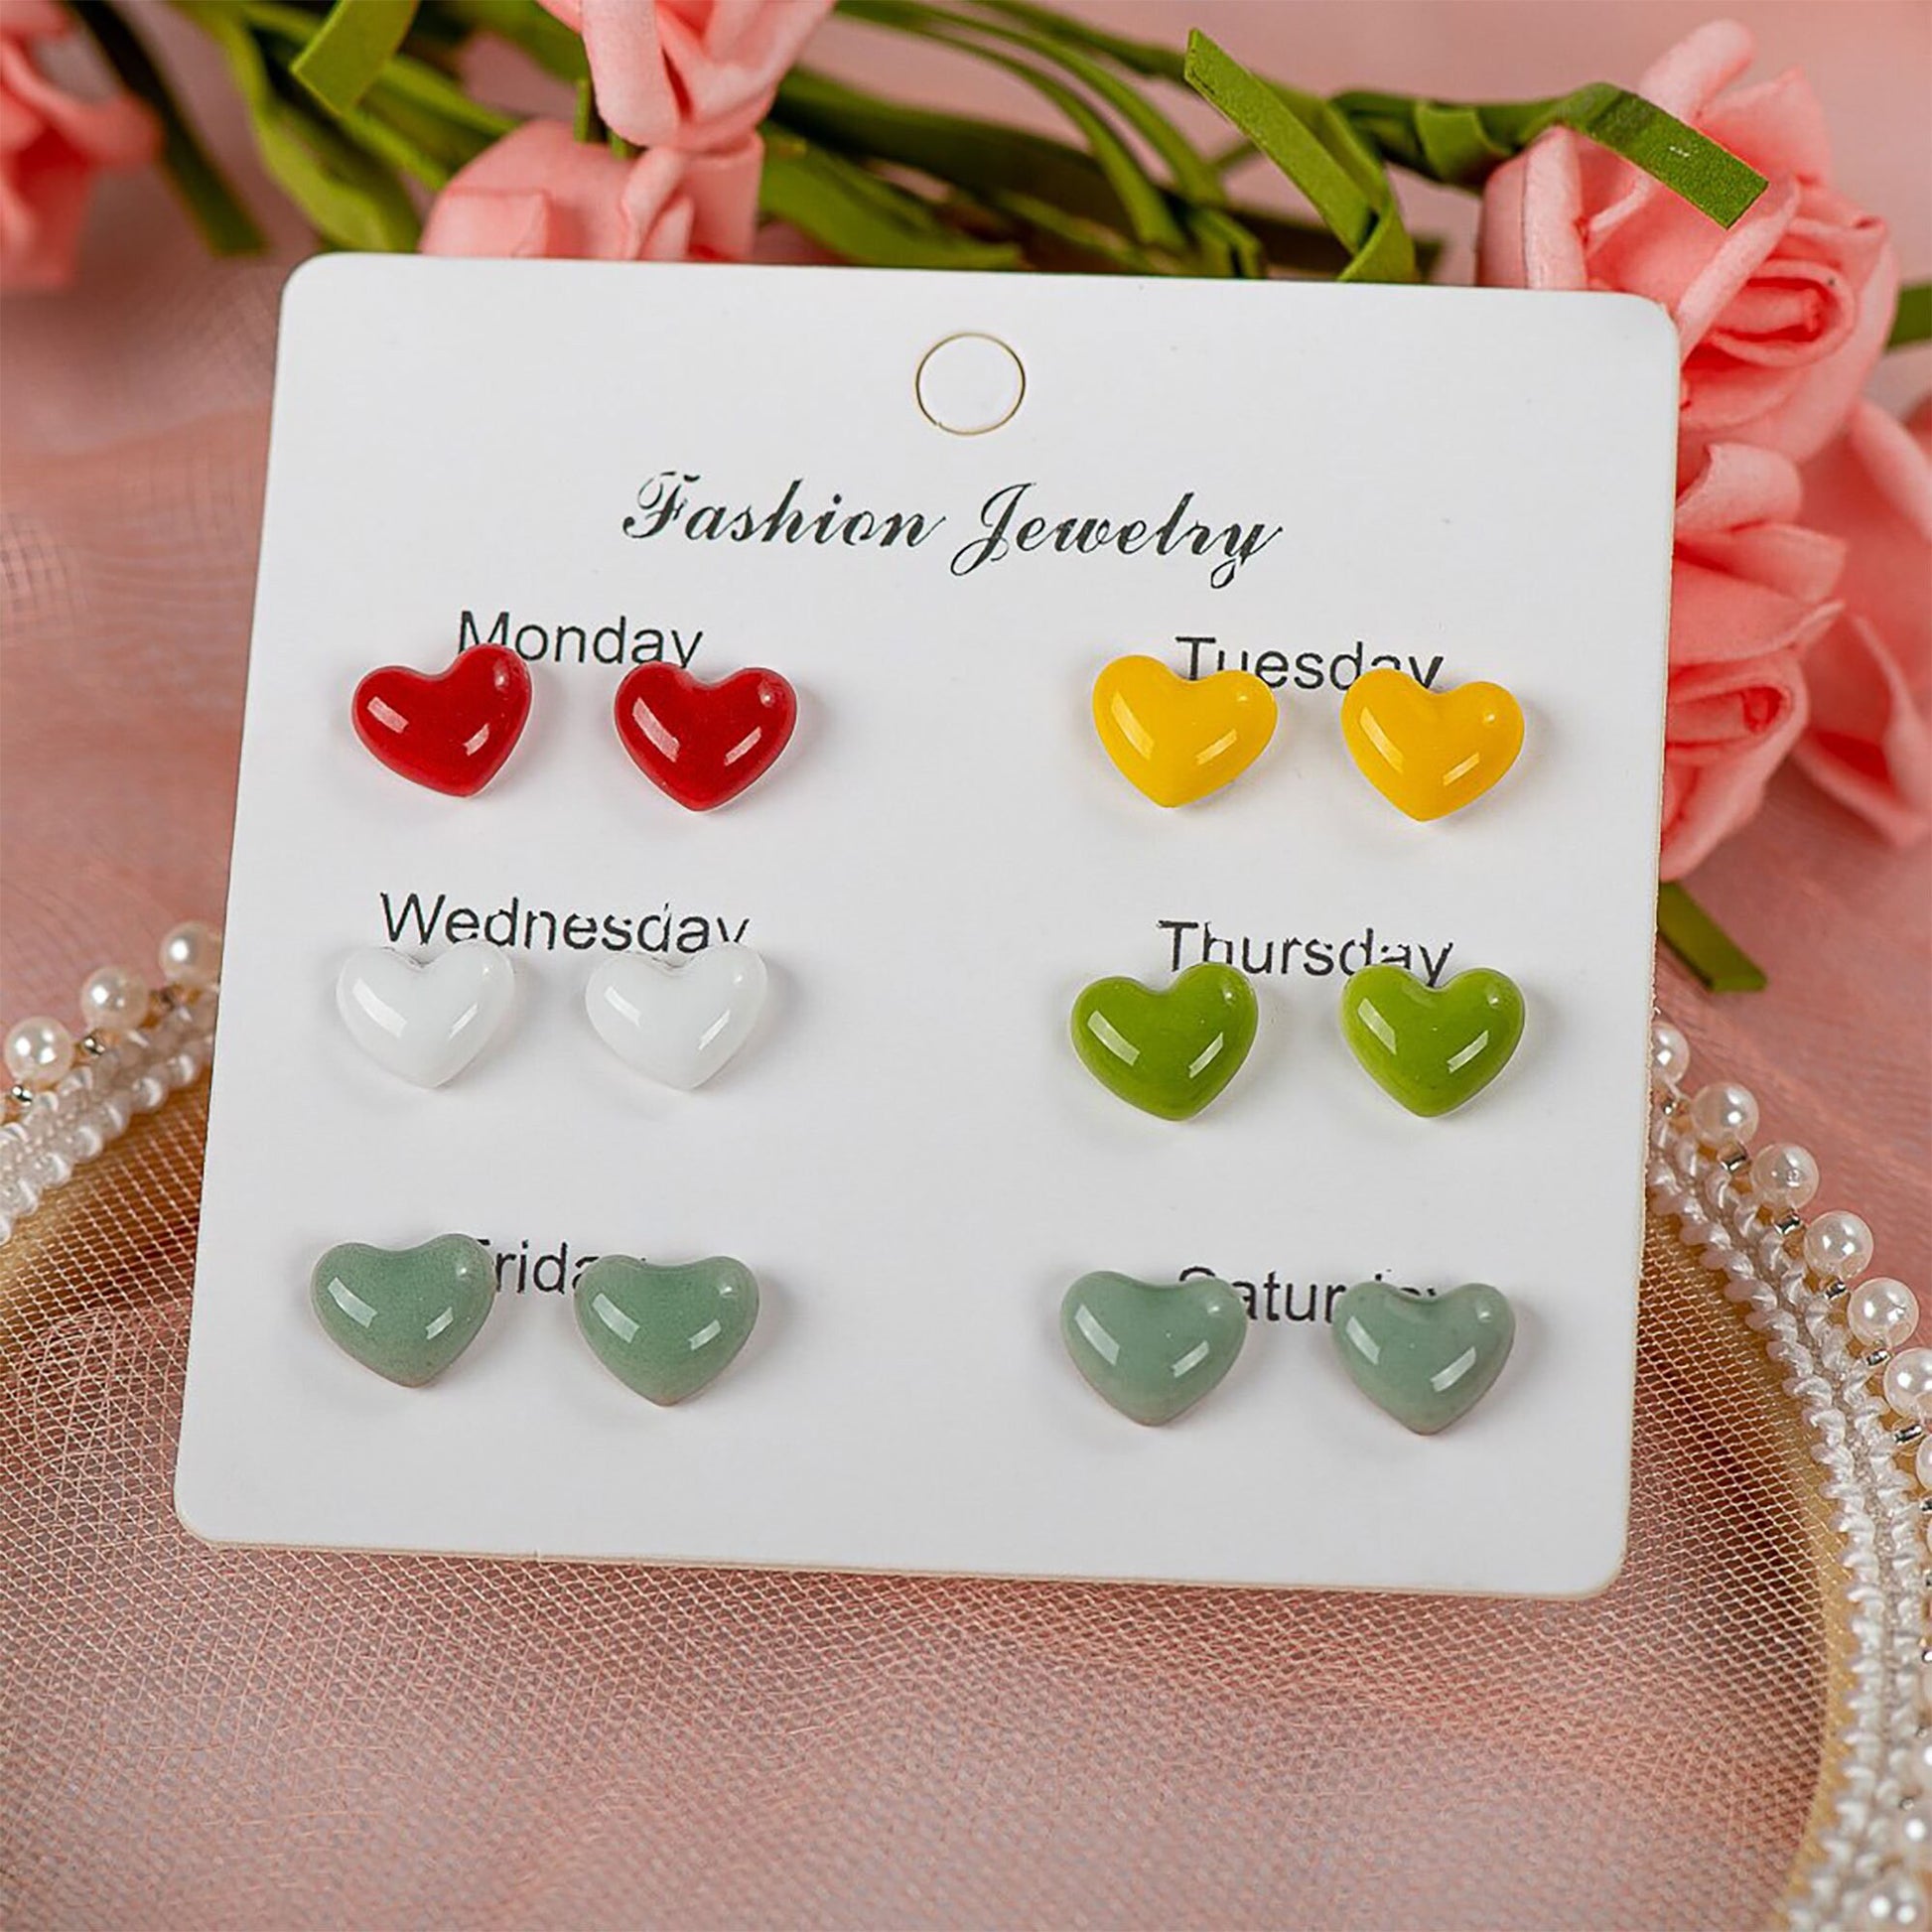 Dainty Heart Earrings Set Multi-Color Ceramic Hearts Clay Studs Mix and Match All Week Fashion Summer Casual Outfit Friends Girls Gift Idea